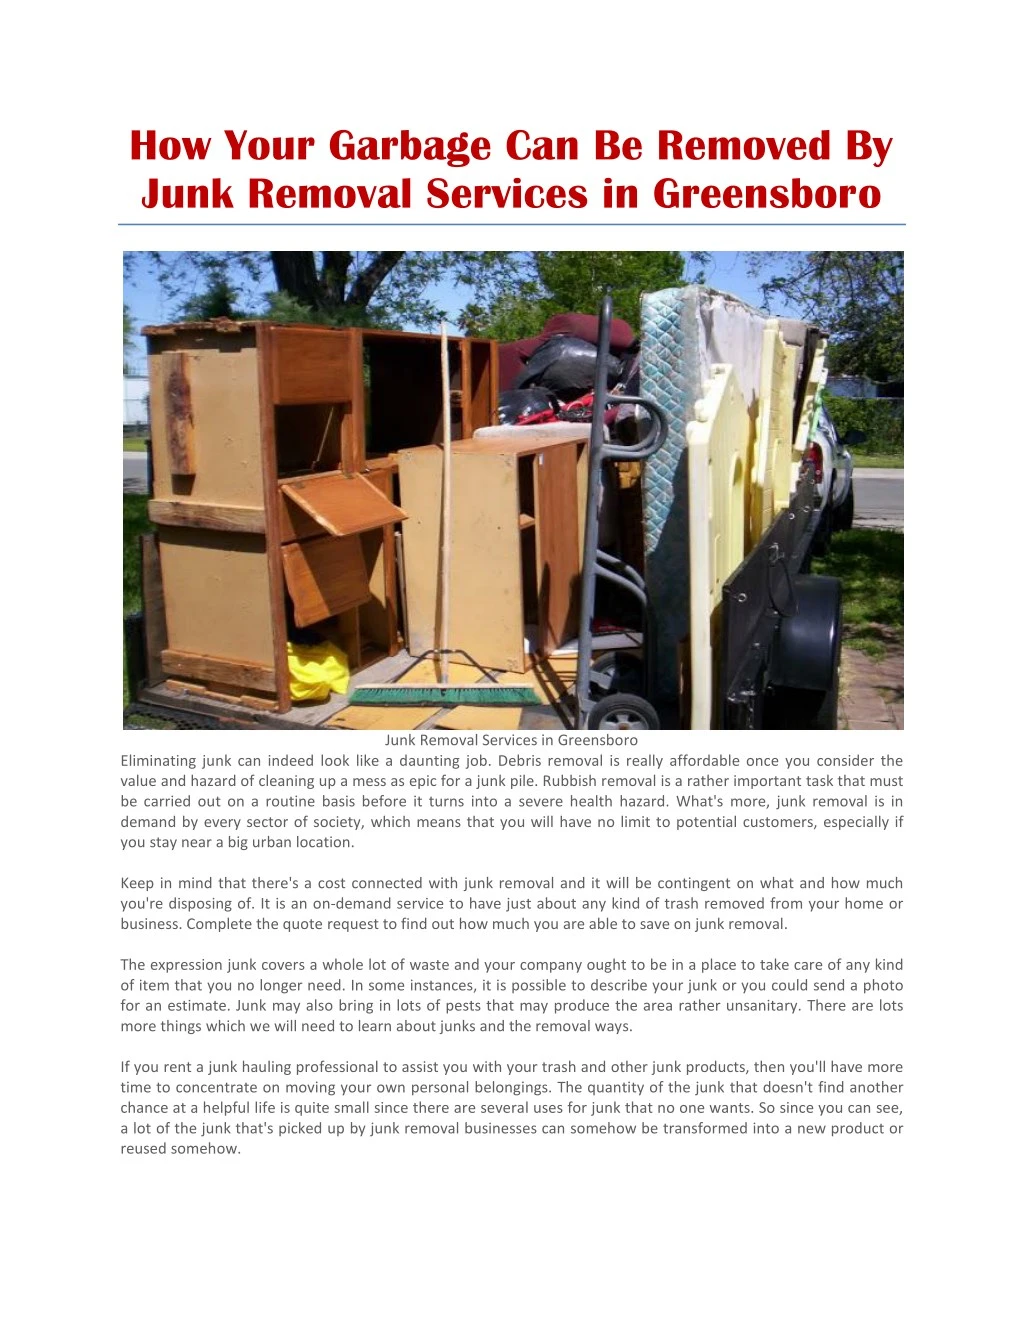 how your garbage can be removed by junk removal